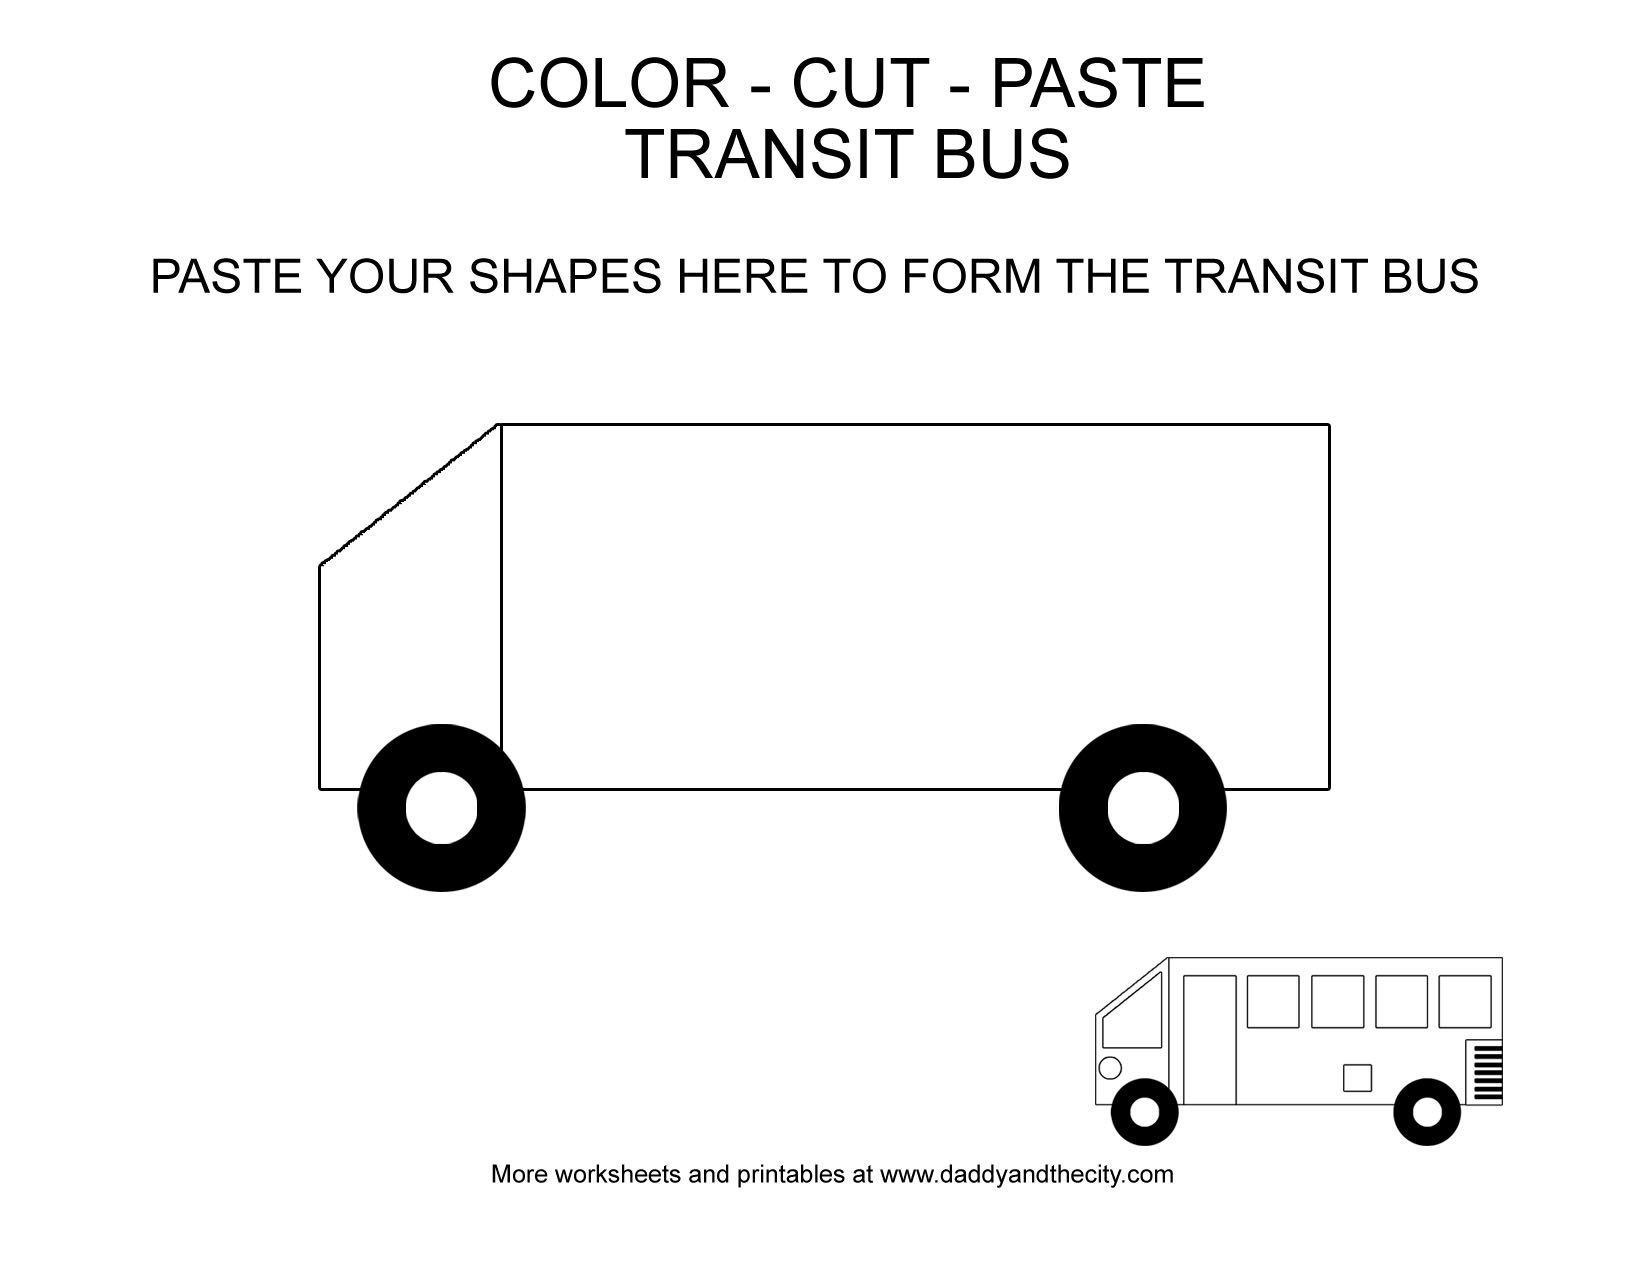 Vehicle-Themed Color-Cut-Paste Worksheets for Toddlers – Daddy and the City